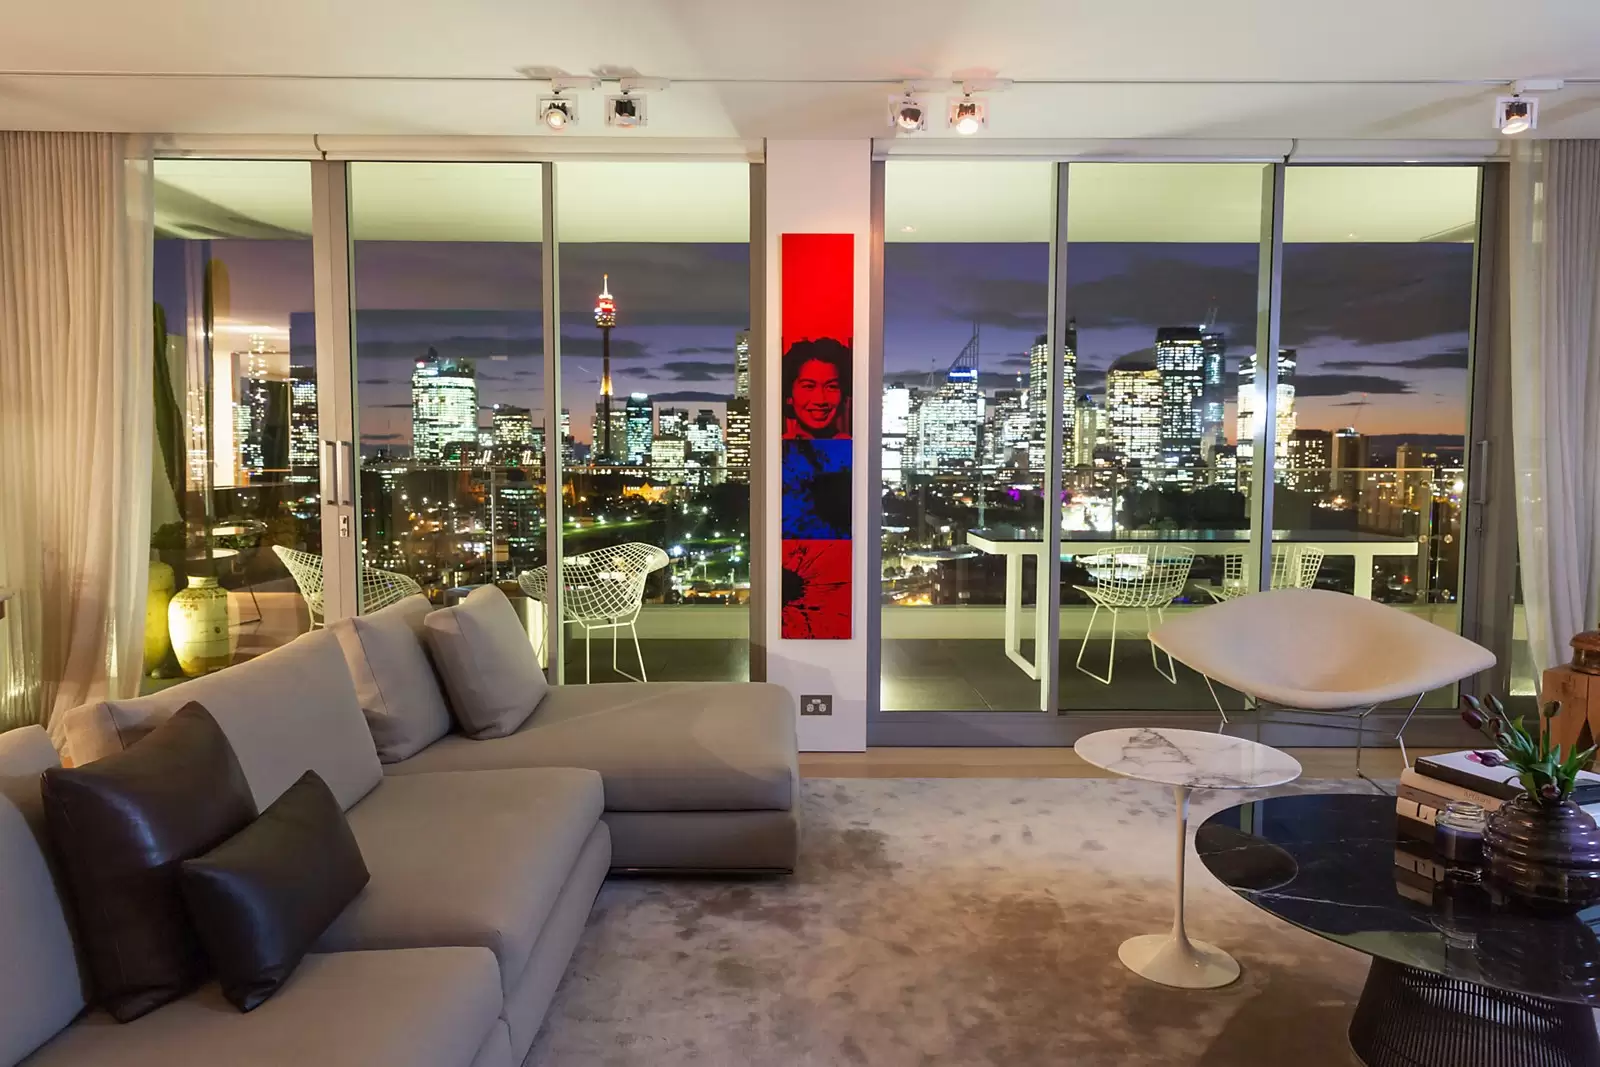 Photo #24: 1401/81 Macleay Street, Potts Point - Sold by Sydney Sotheby's International Realty